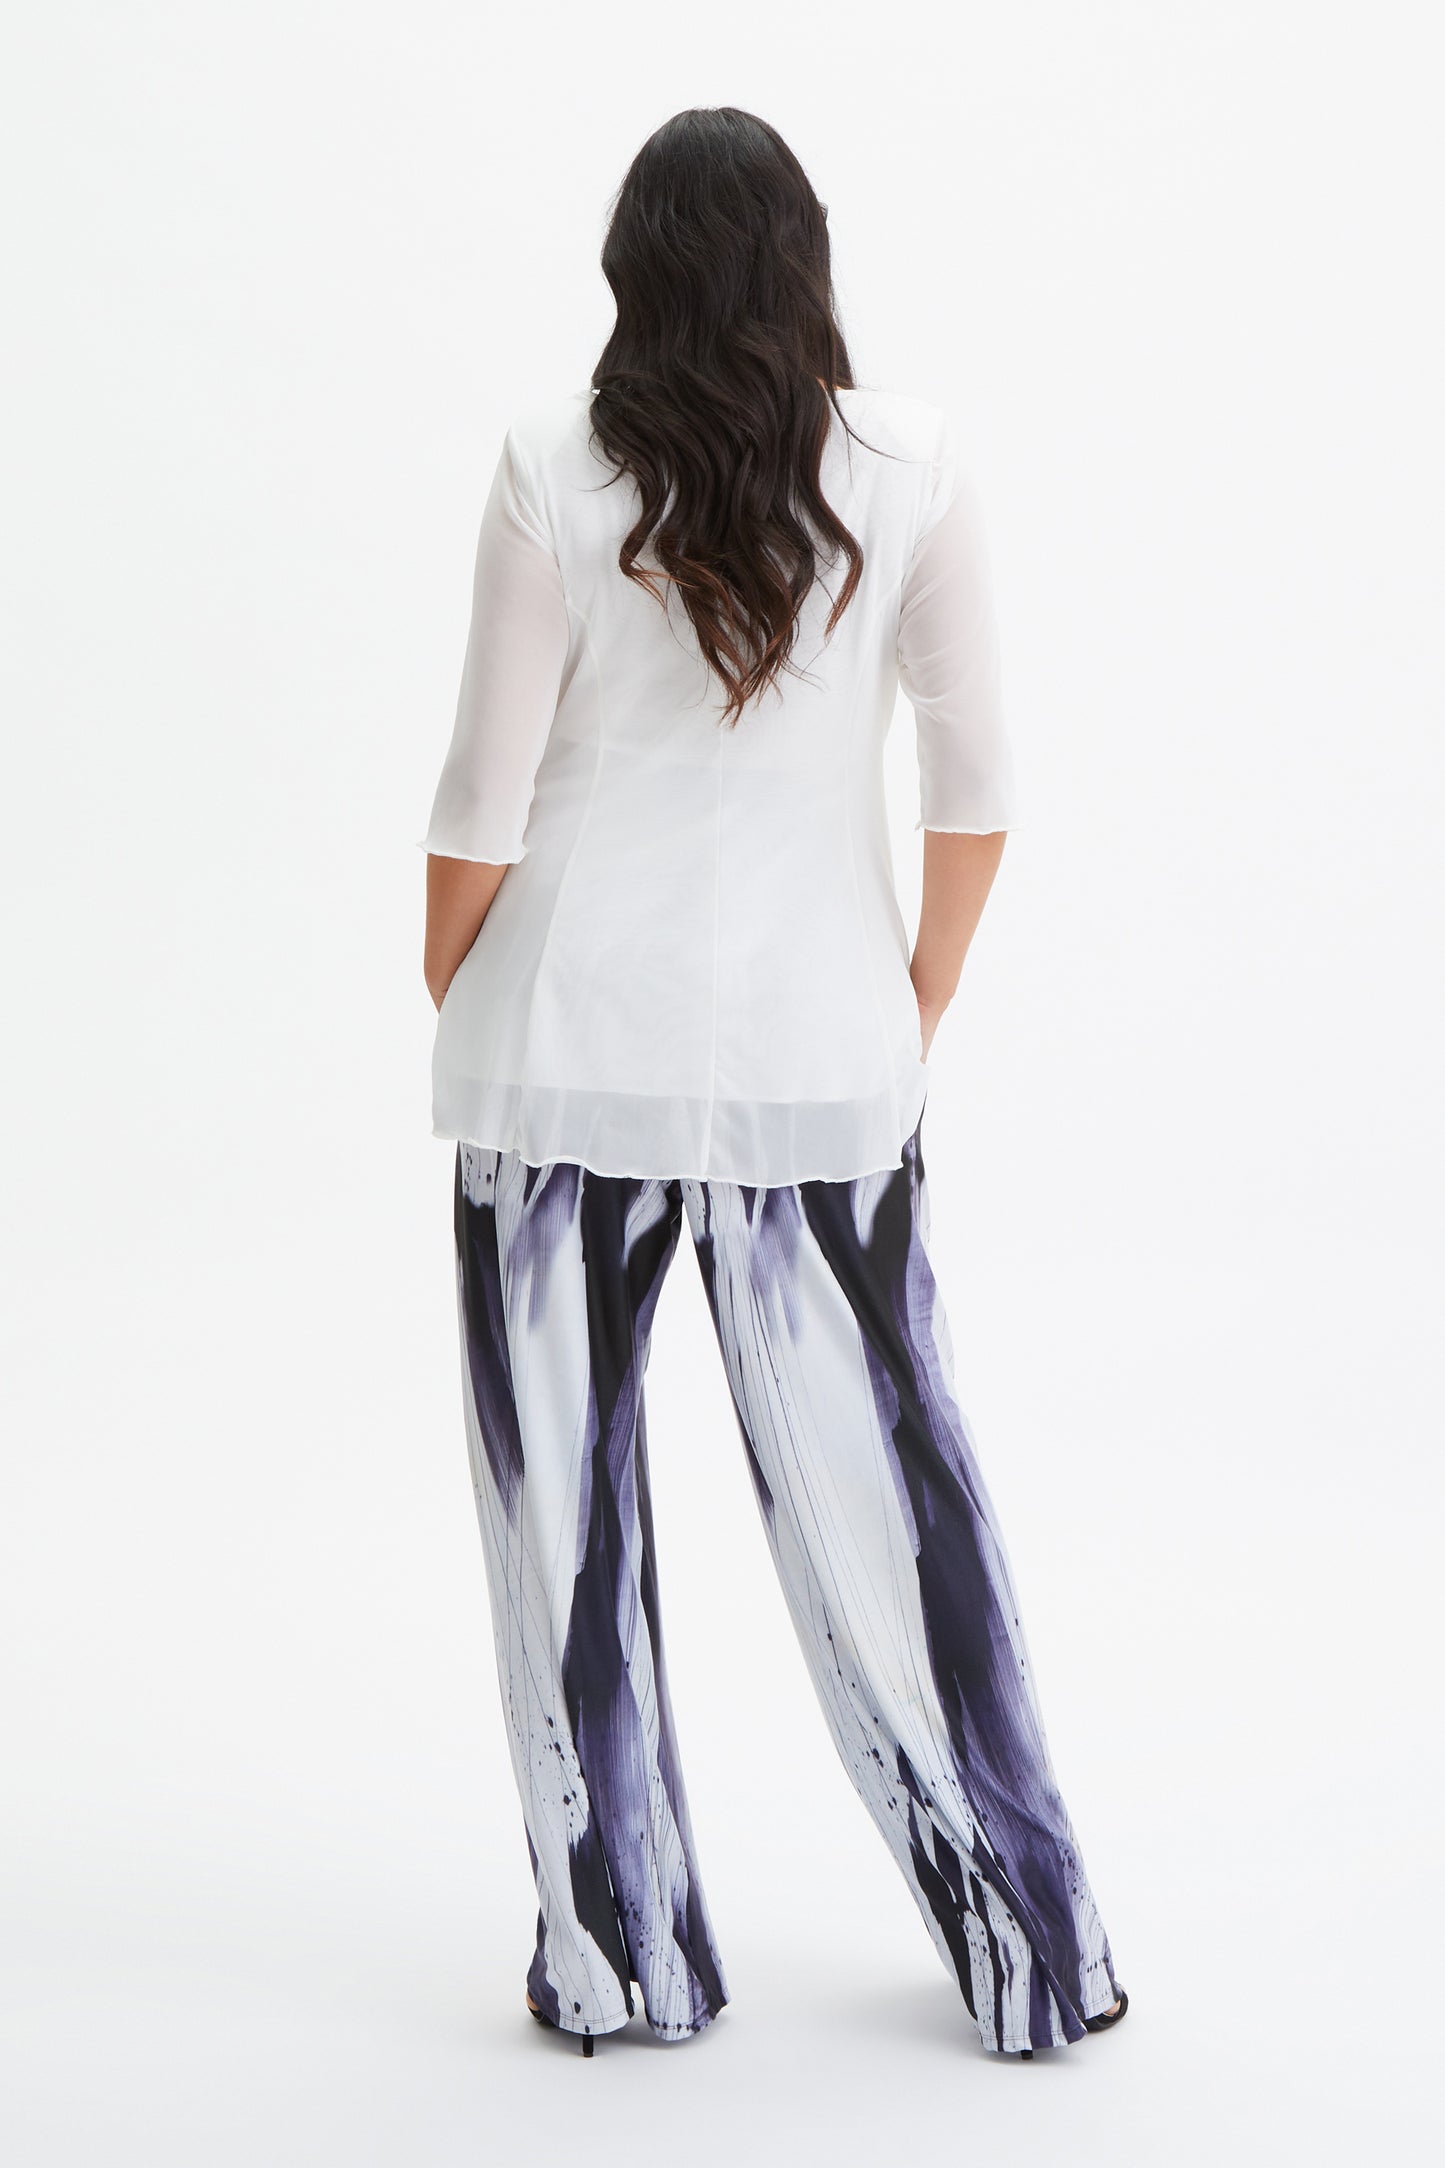 The Black Grey Ivory Bette Lounge Pant